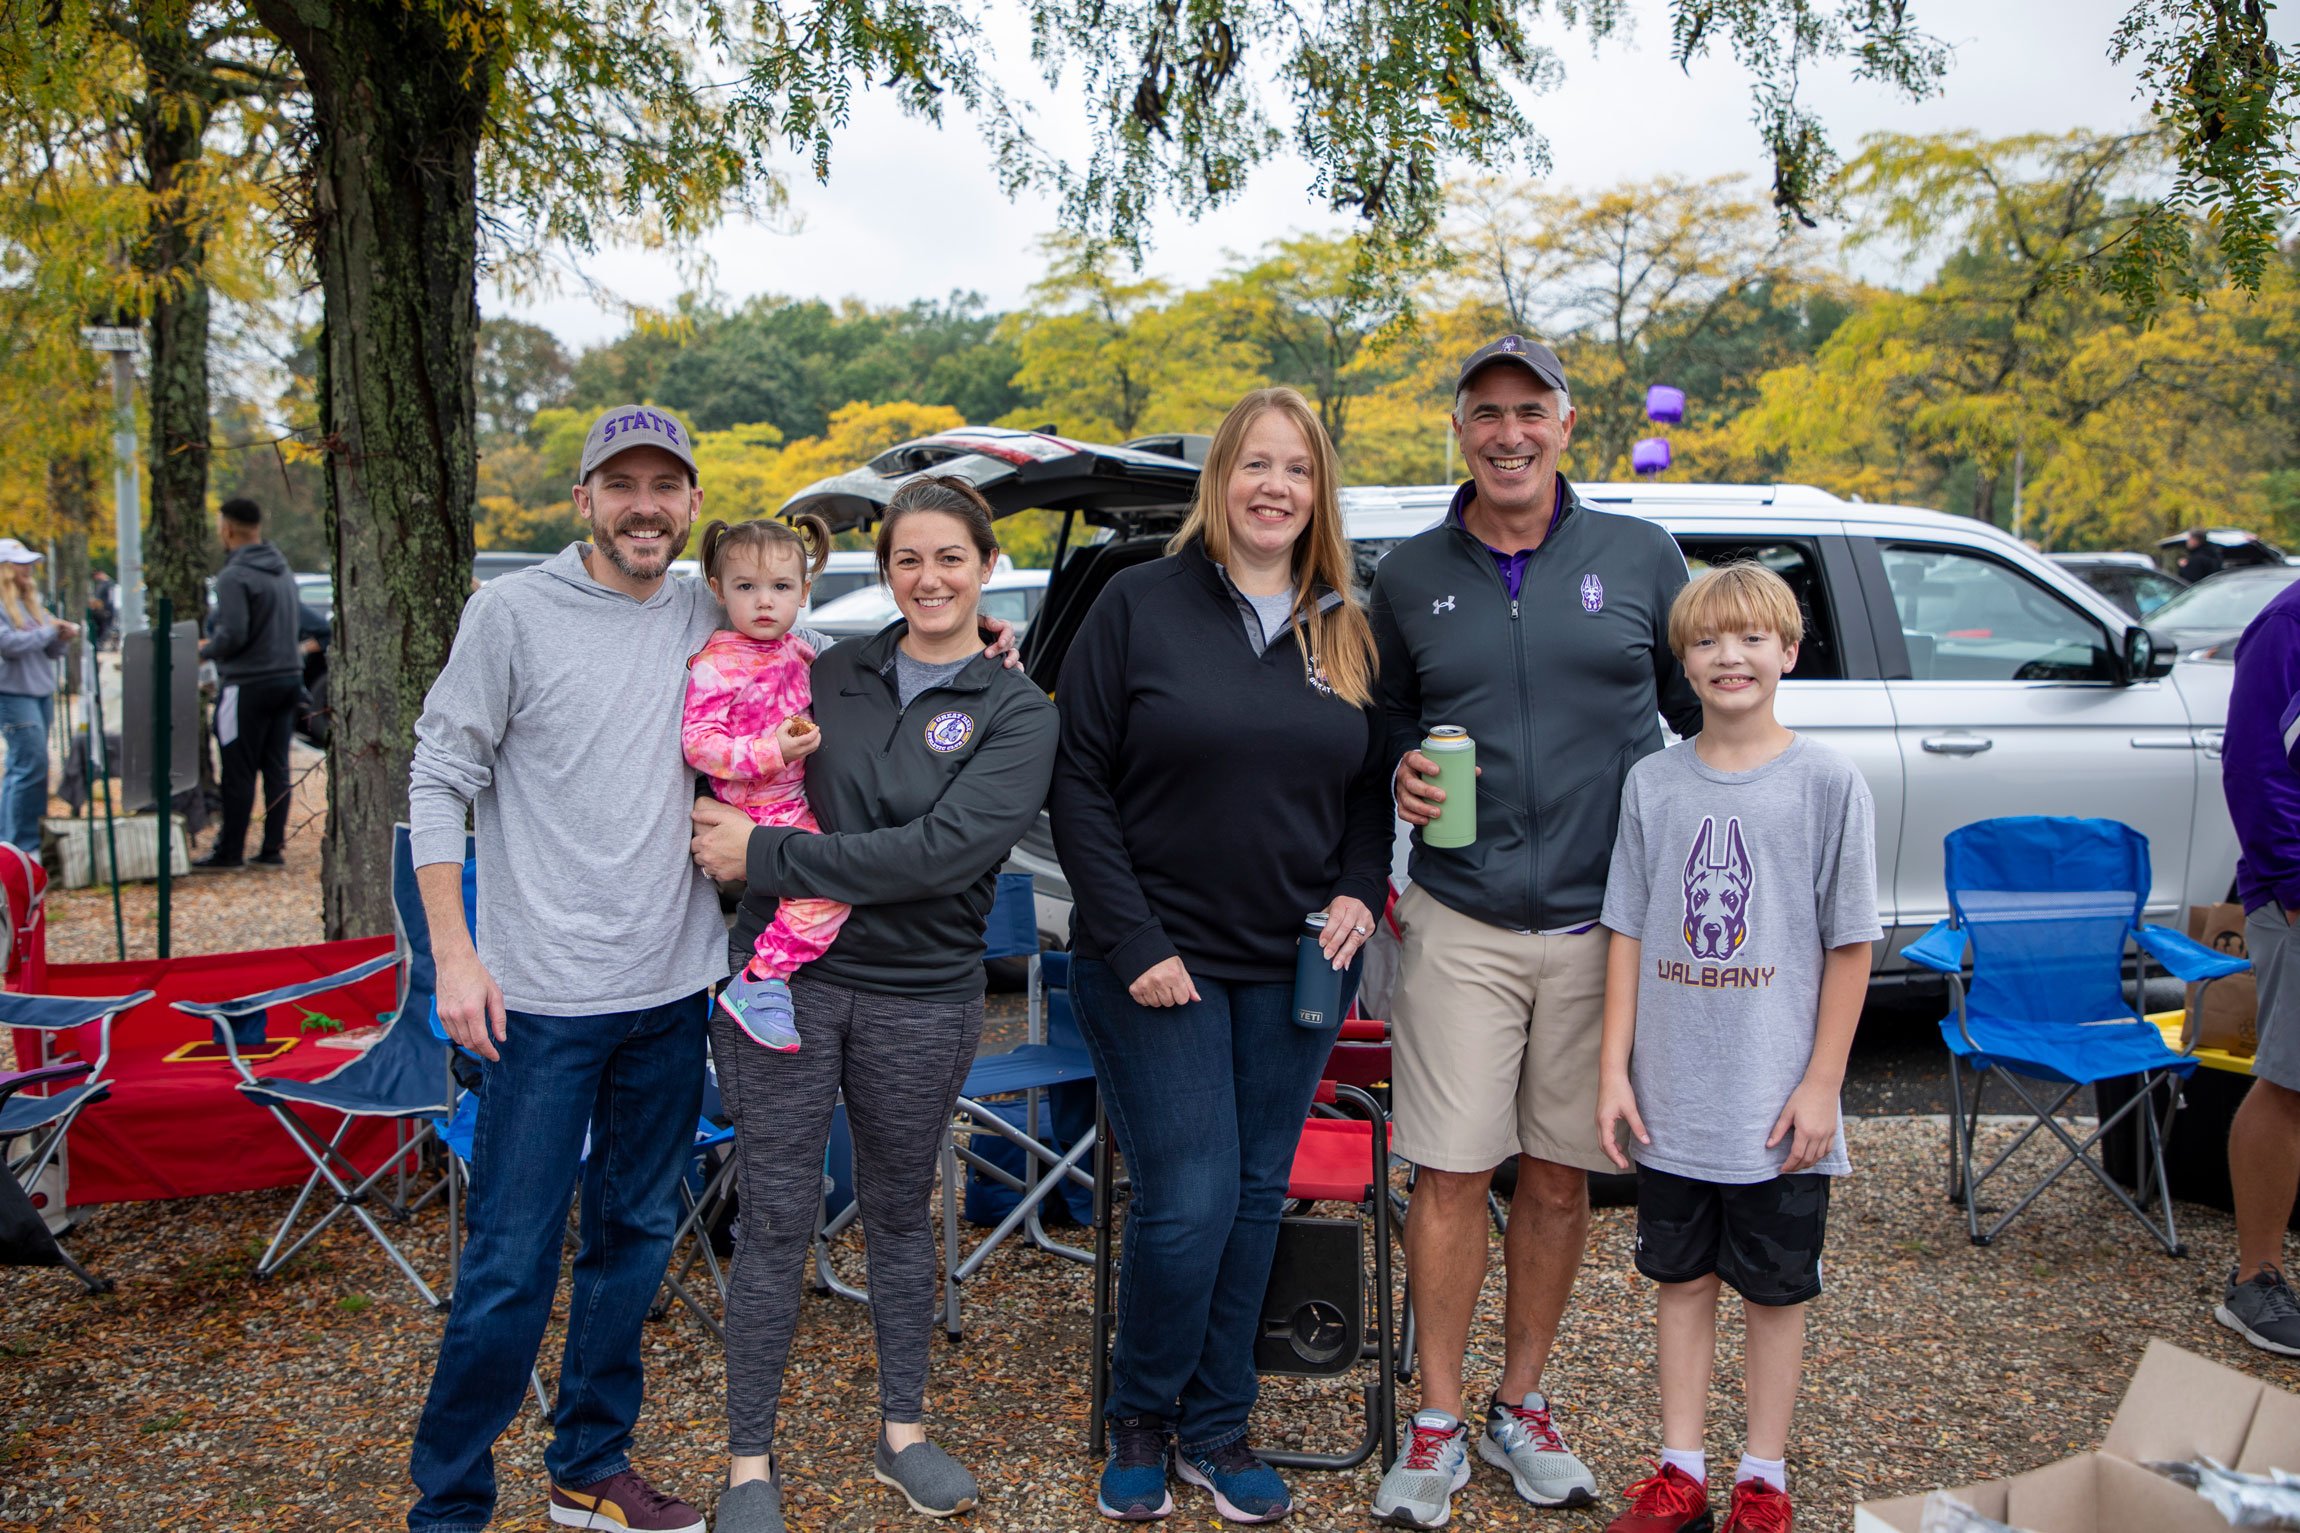 Four adults and two children smile as they pose for a photo while tailgating.